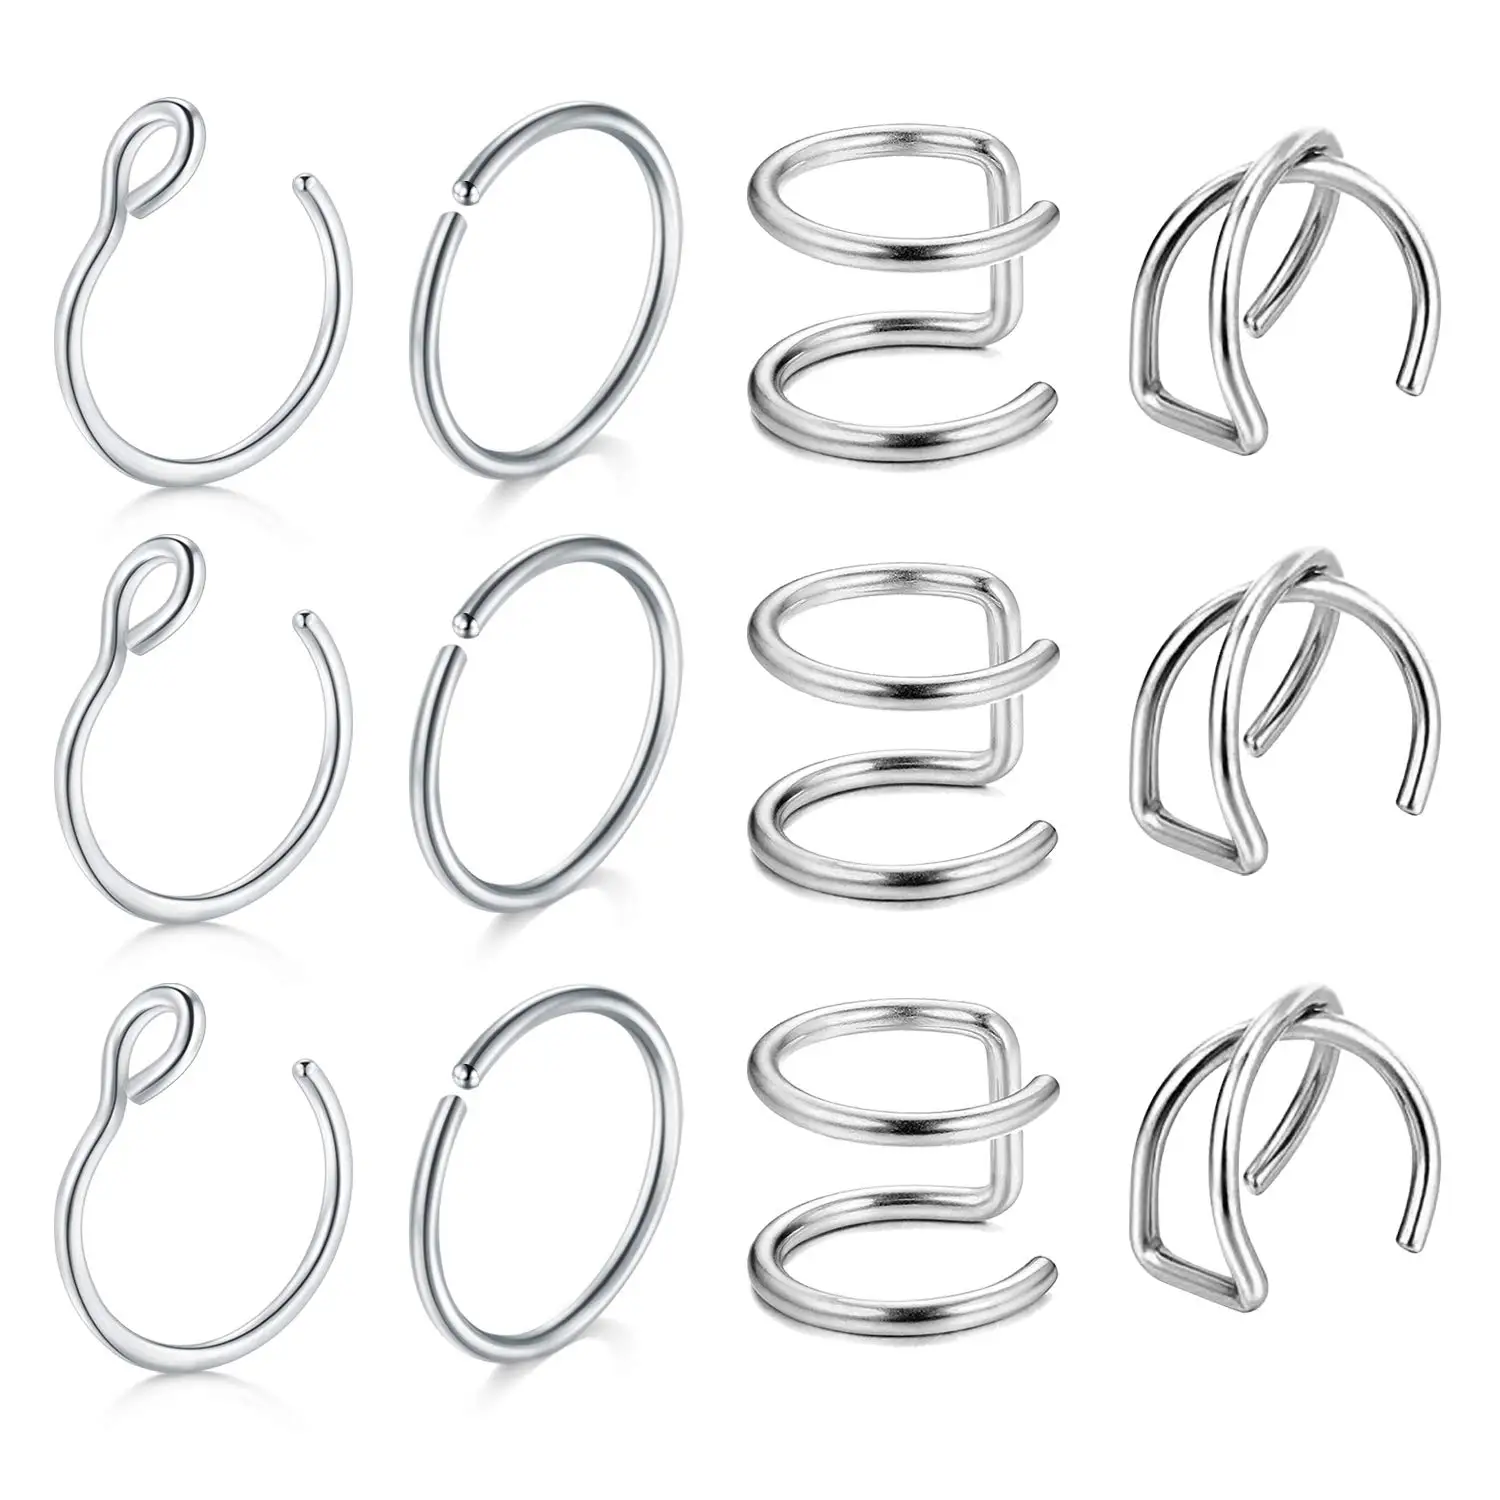 

12pcs 20G Woman False Lip Ring Cartilage Earring Silver Rose Gold Ear Cuff Non Perforated Clip Style Artificial Nose Ring 8mm